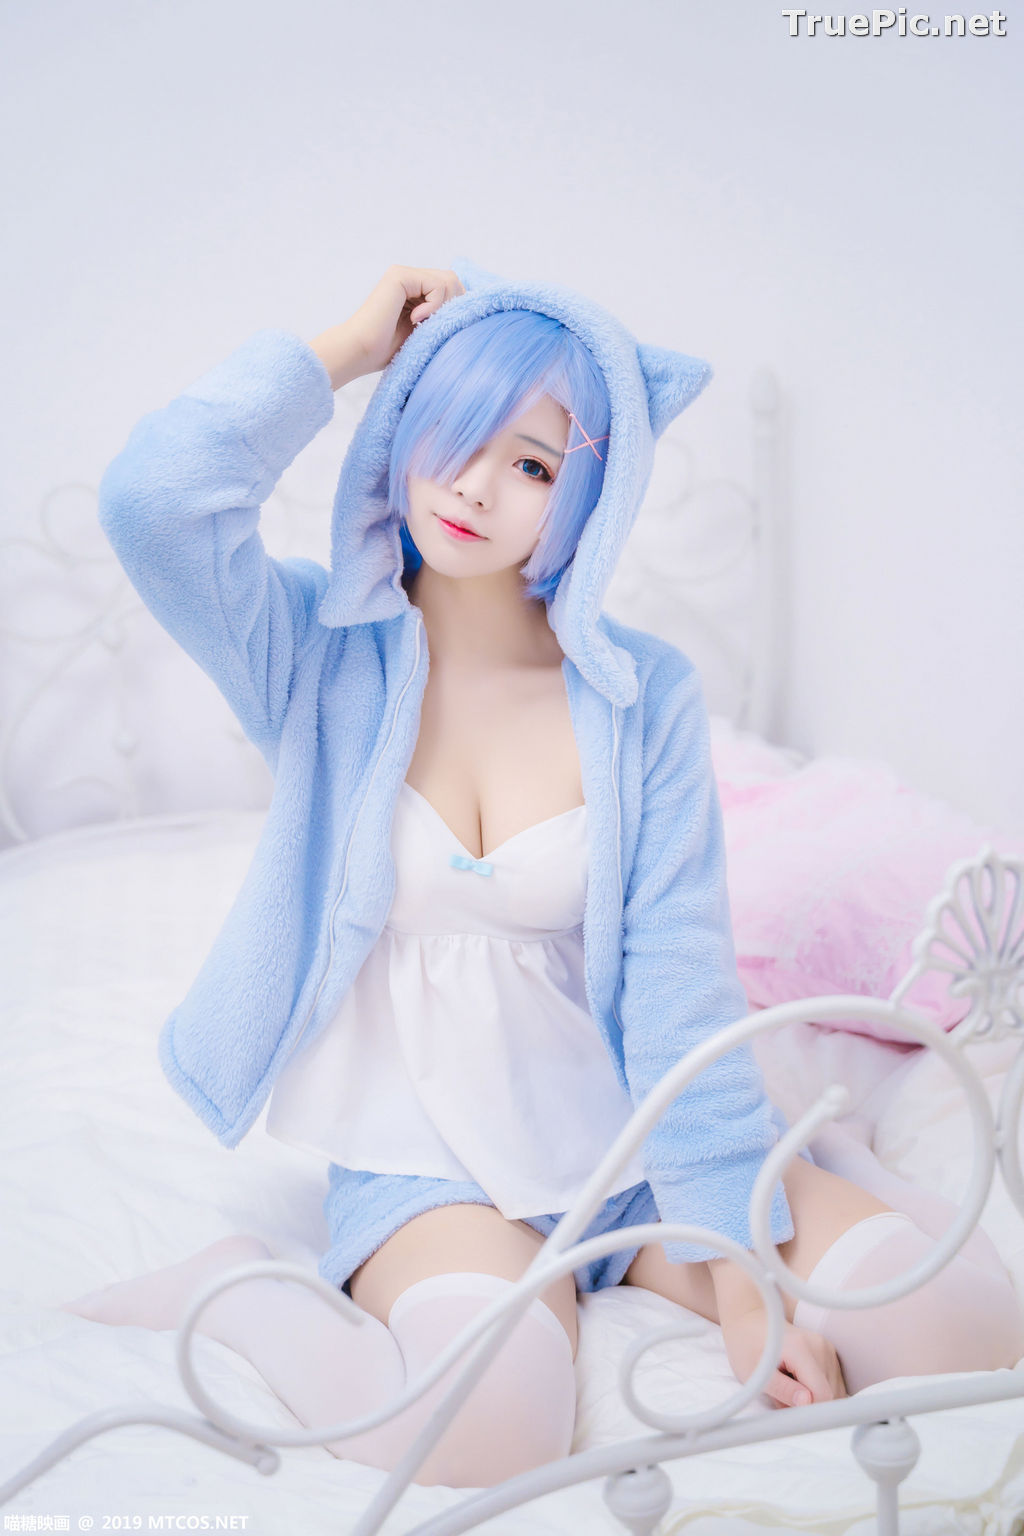 Image [MTCos] 喵糖映画 Vol.043 – Chinese Cute Model – Sexy Rem Cosplay - TruePic.net - Picture-26